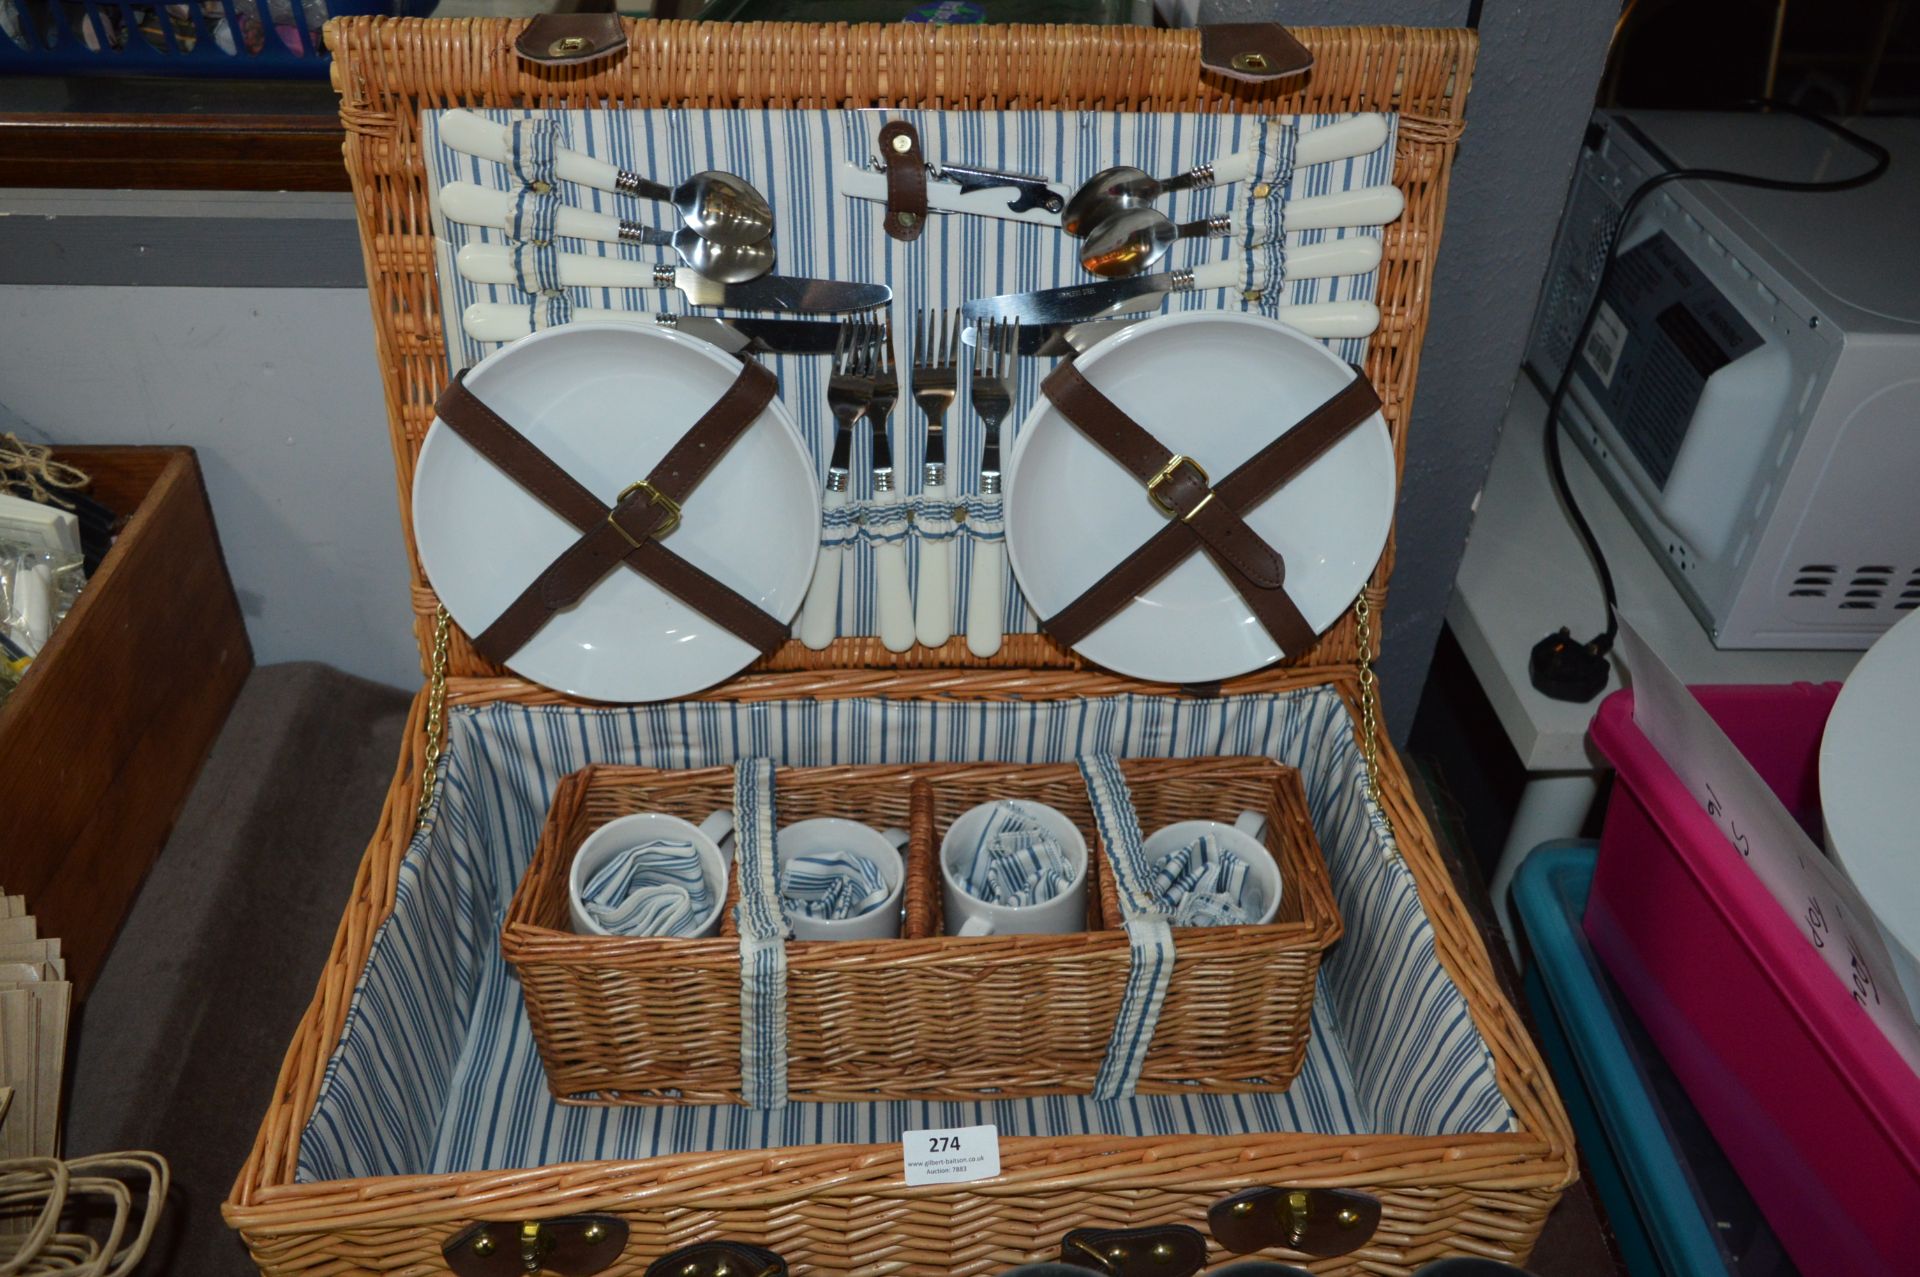 Wicker Picnic Basket and Contents